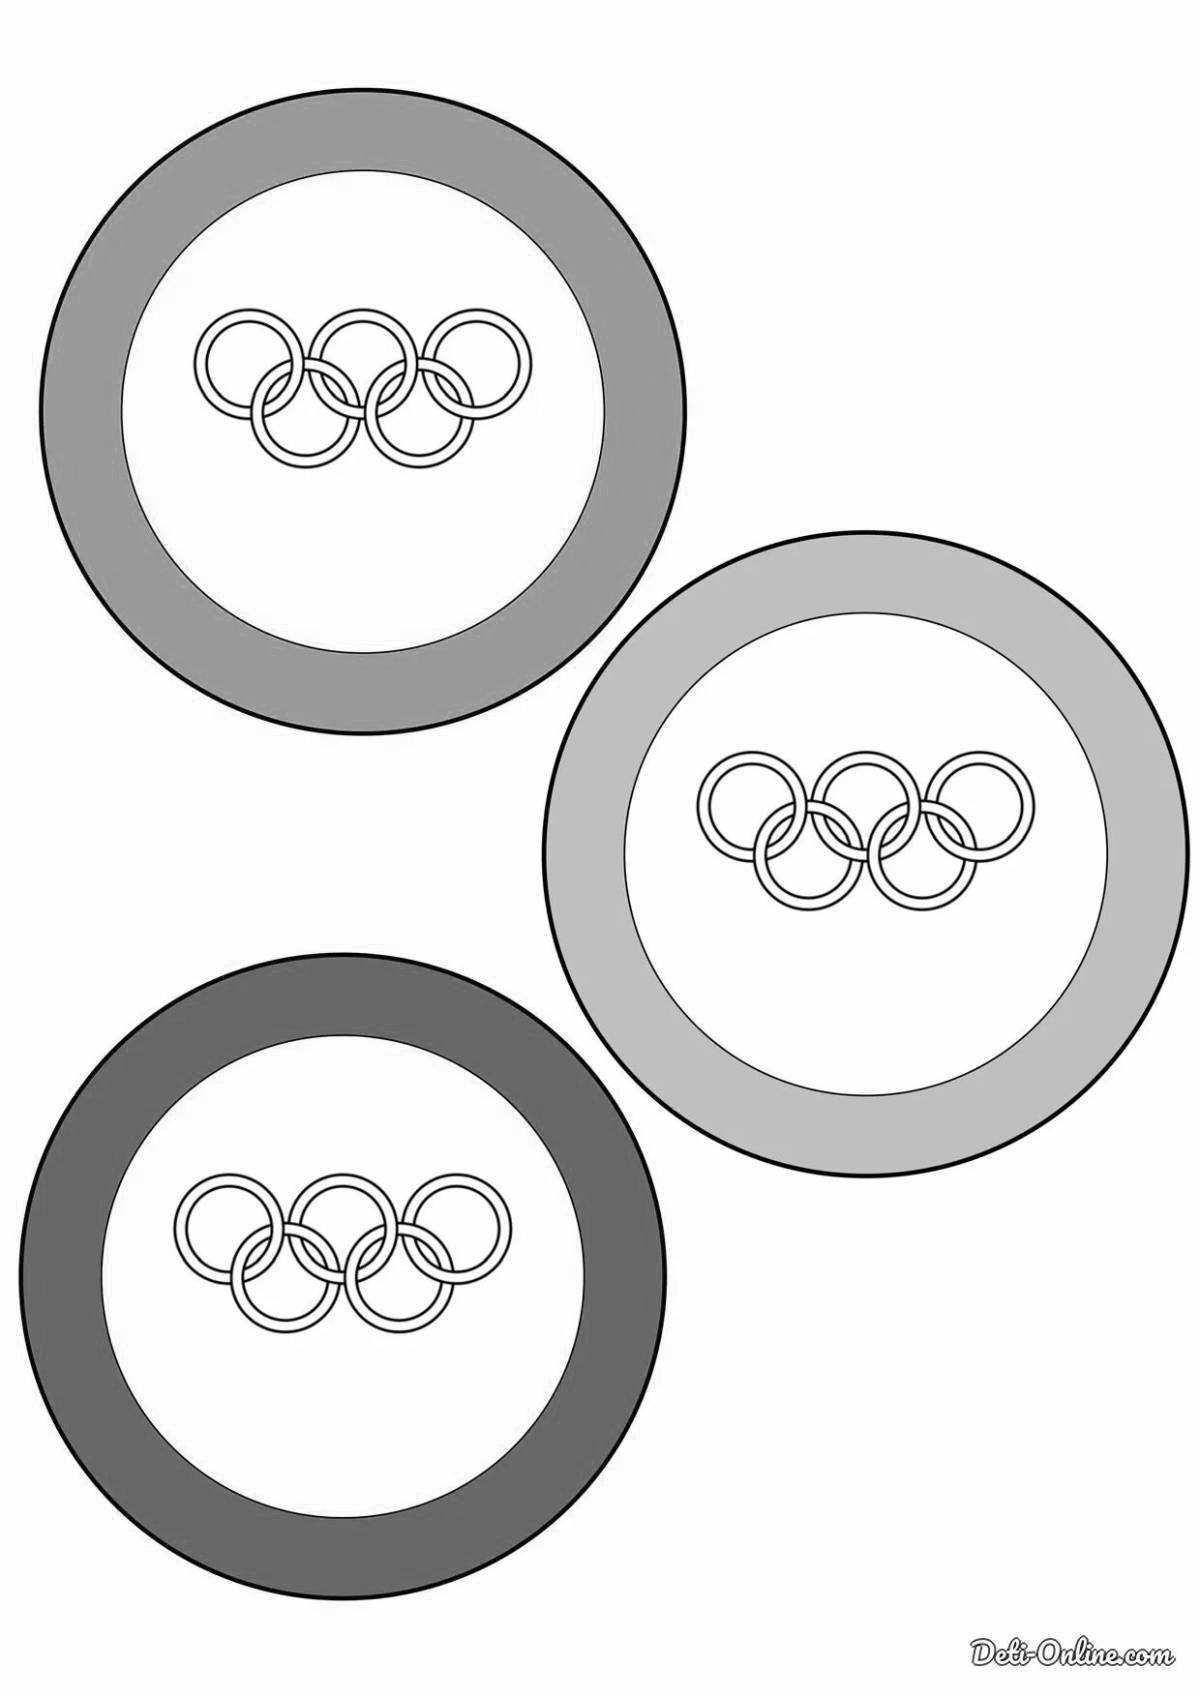 Playful printable olympic rings coloring page